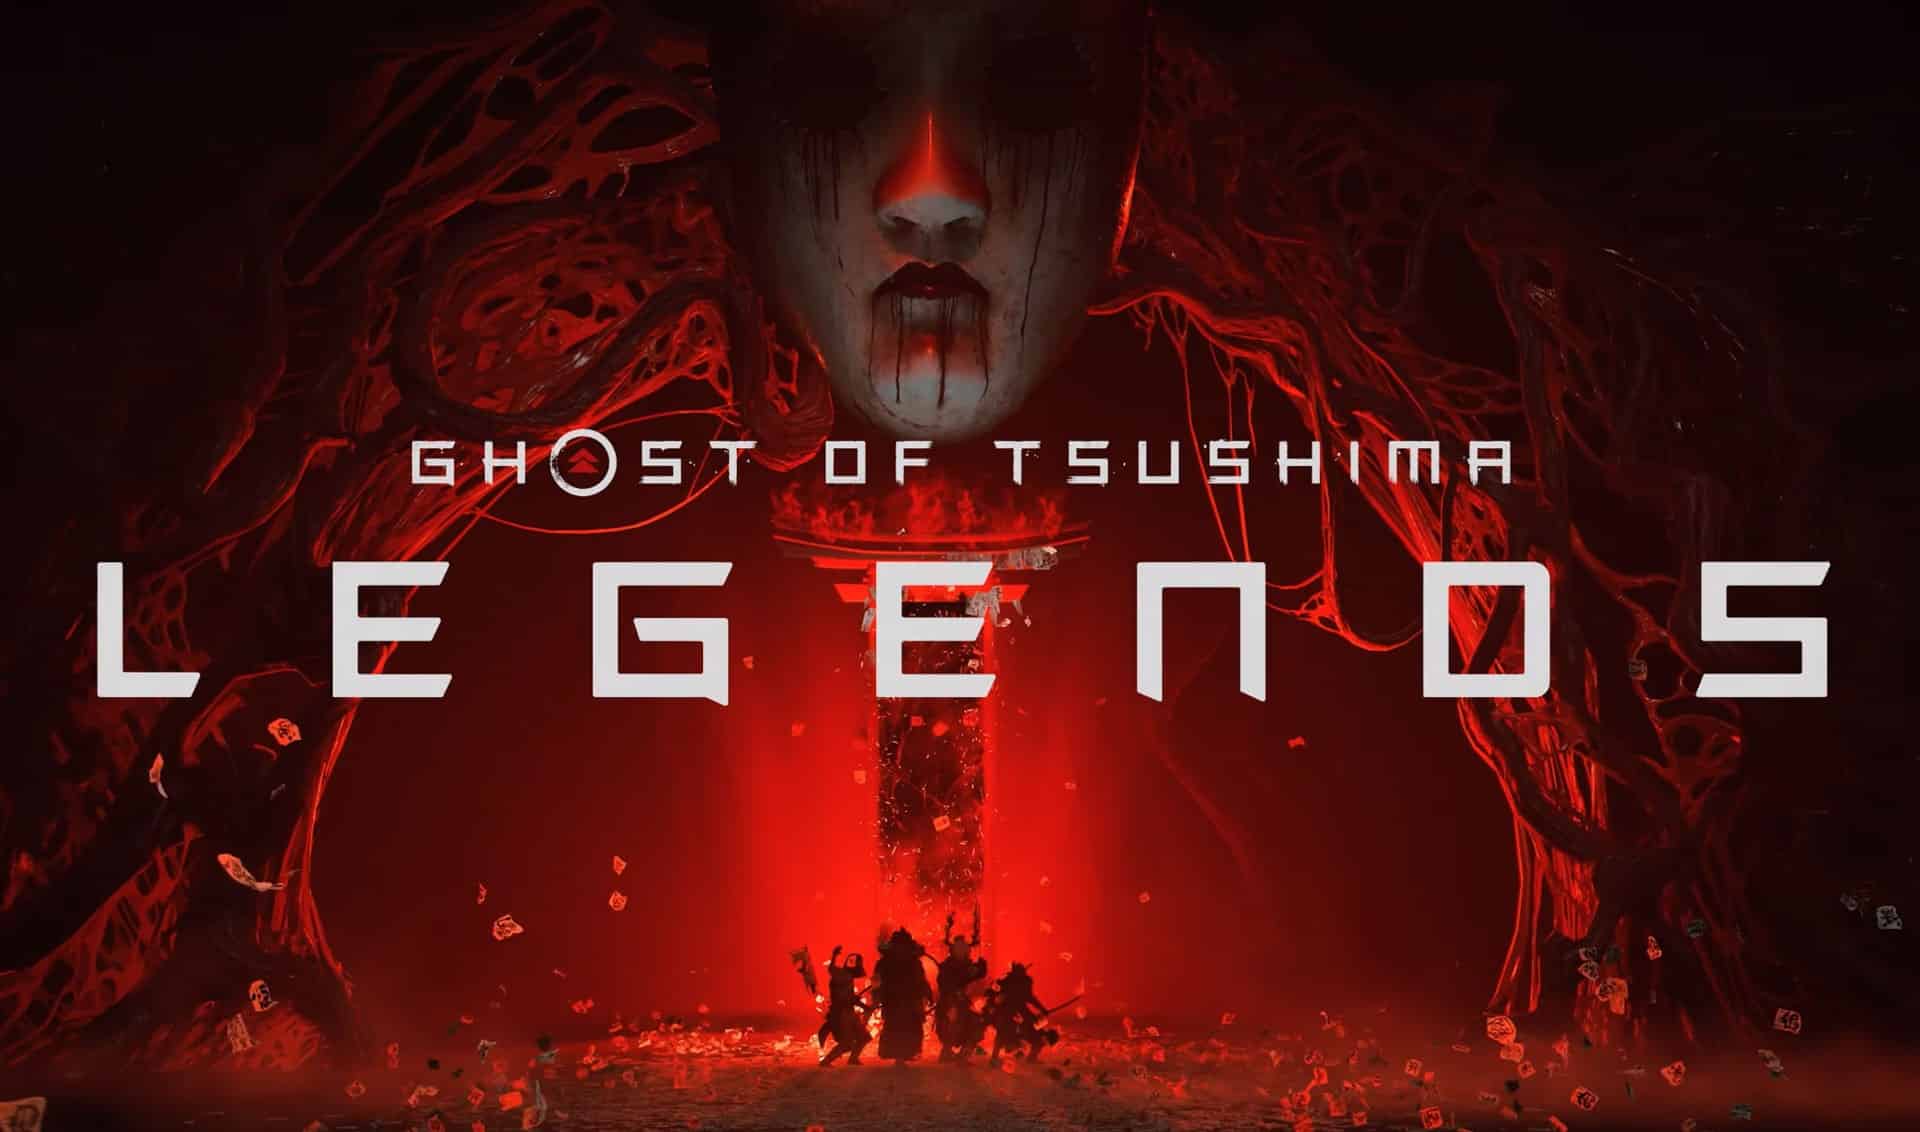 Ghost of Tsushima: Legends is a Free Co-Op Expansion Coming Soon